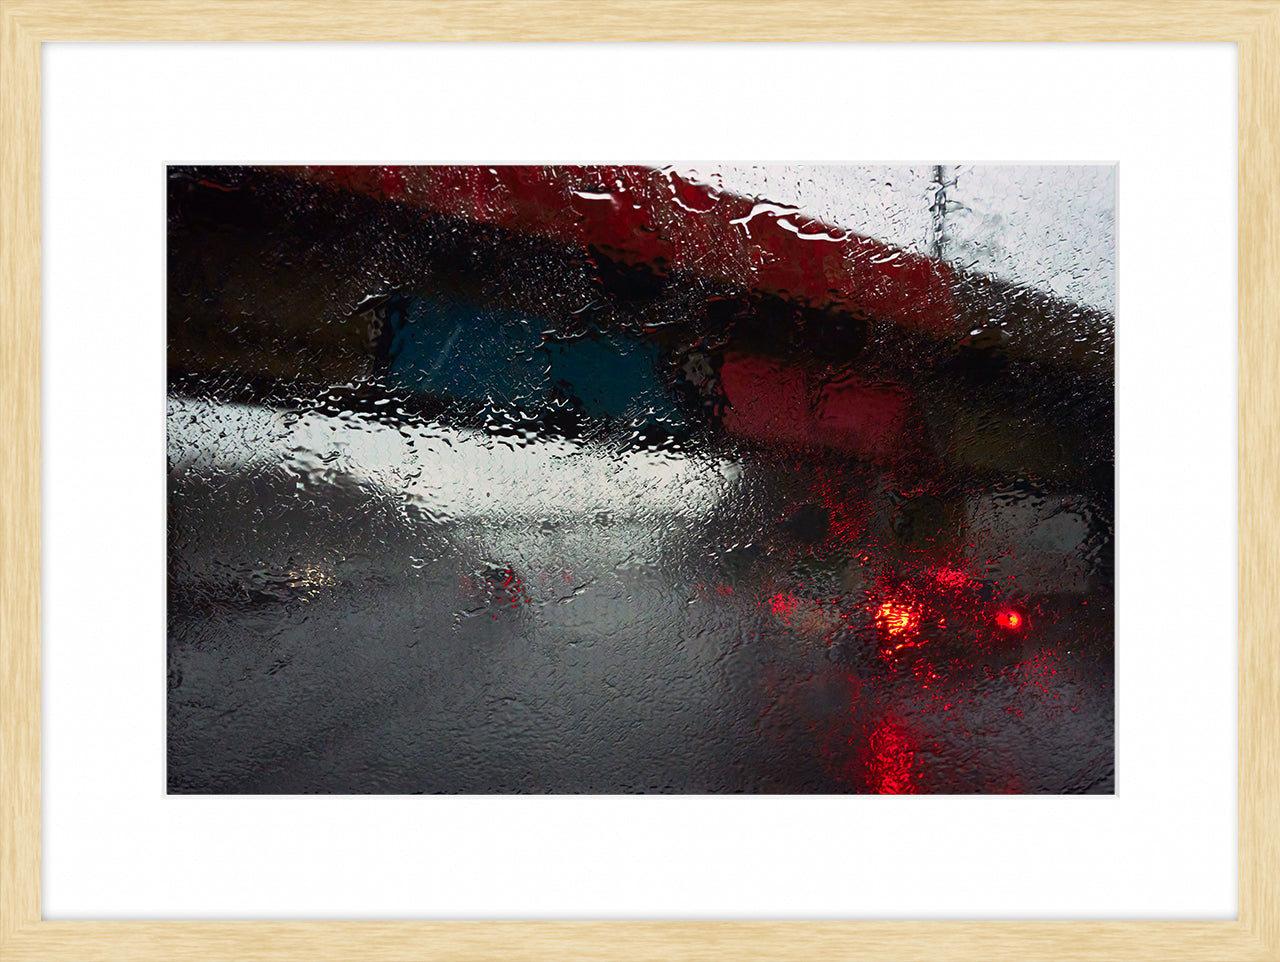 Driving Through The Storm, II